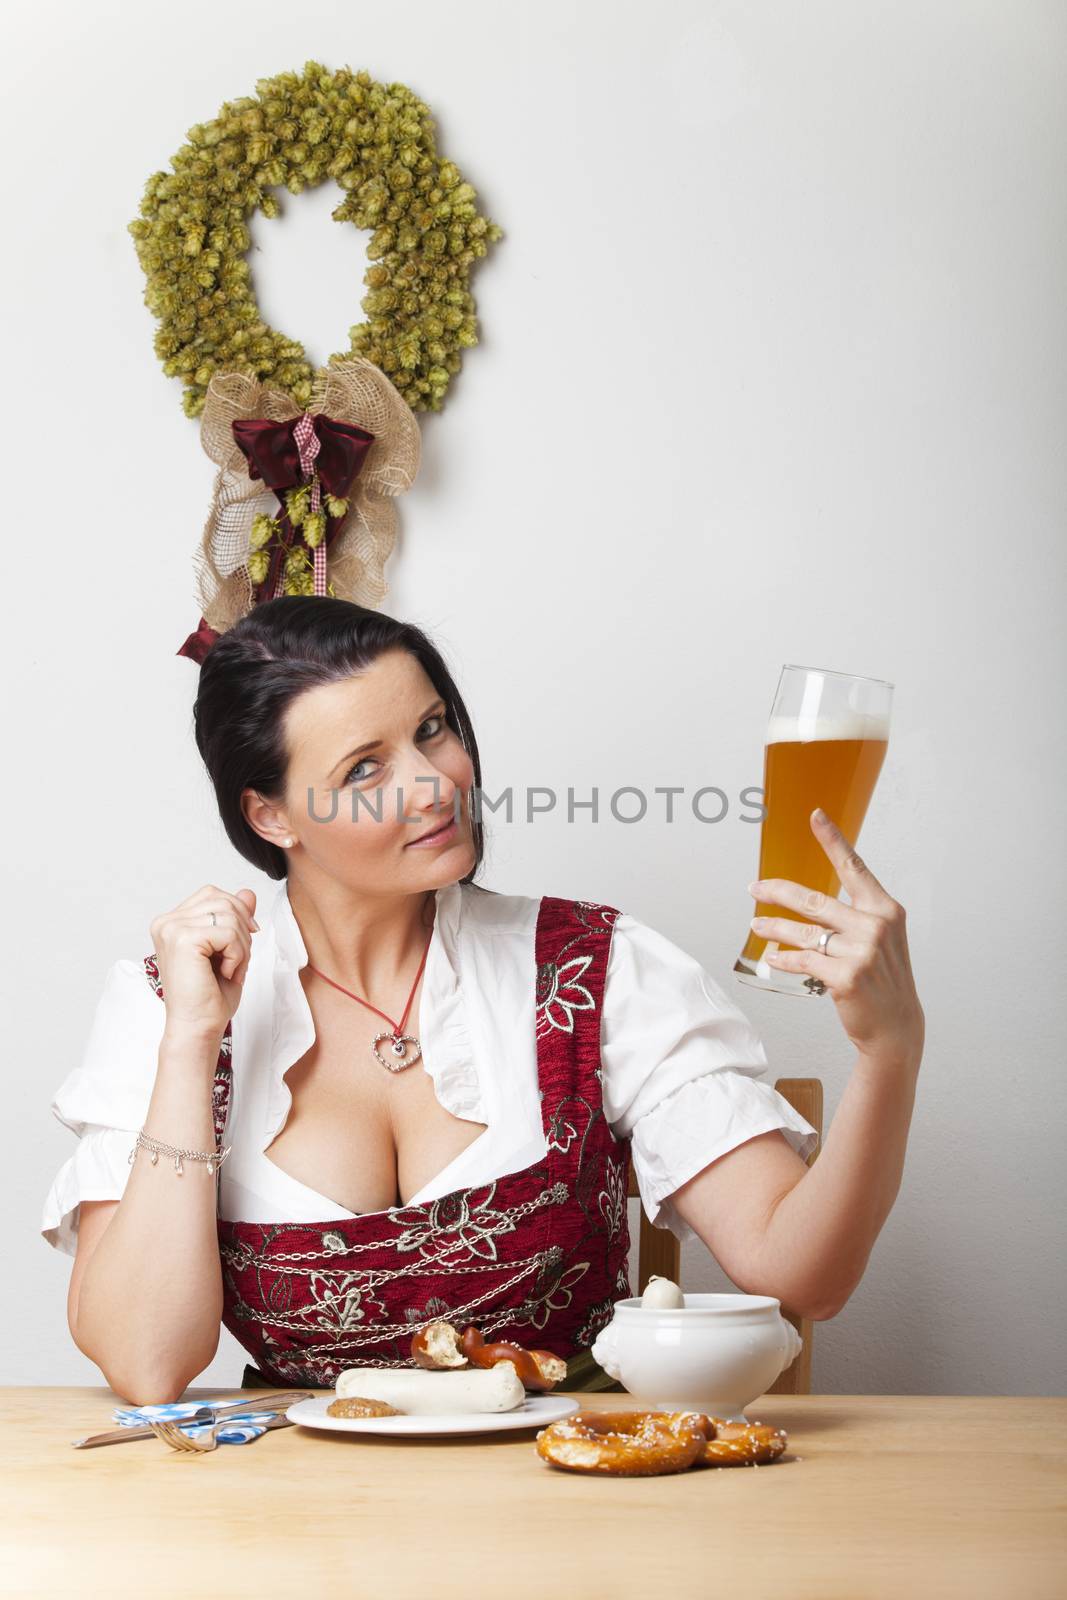 bavarian woman in a dirndl with sausages by bernjuer